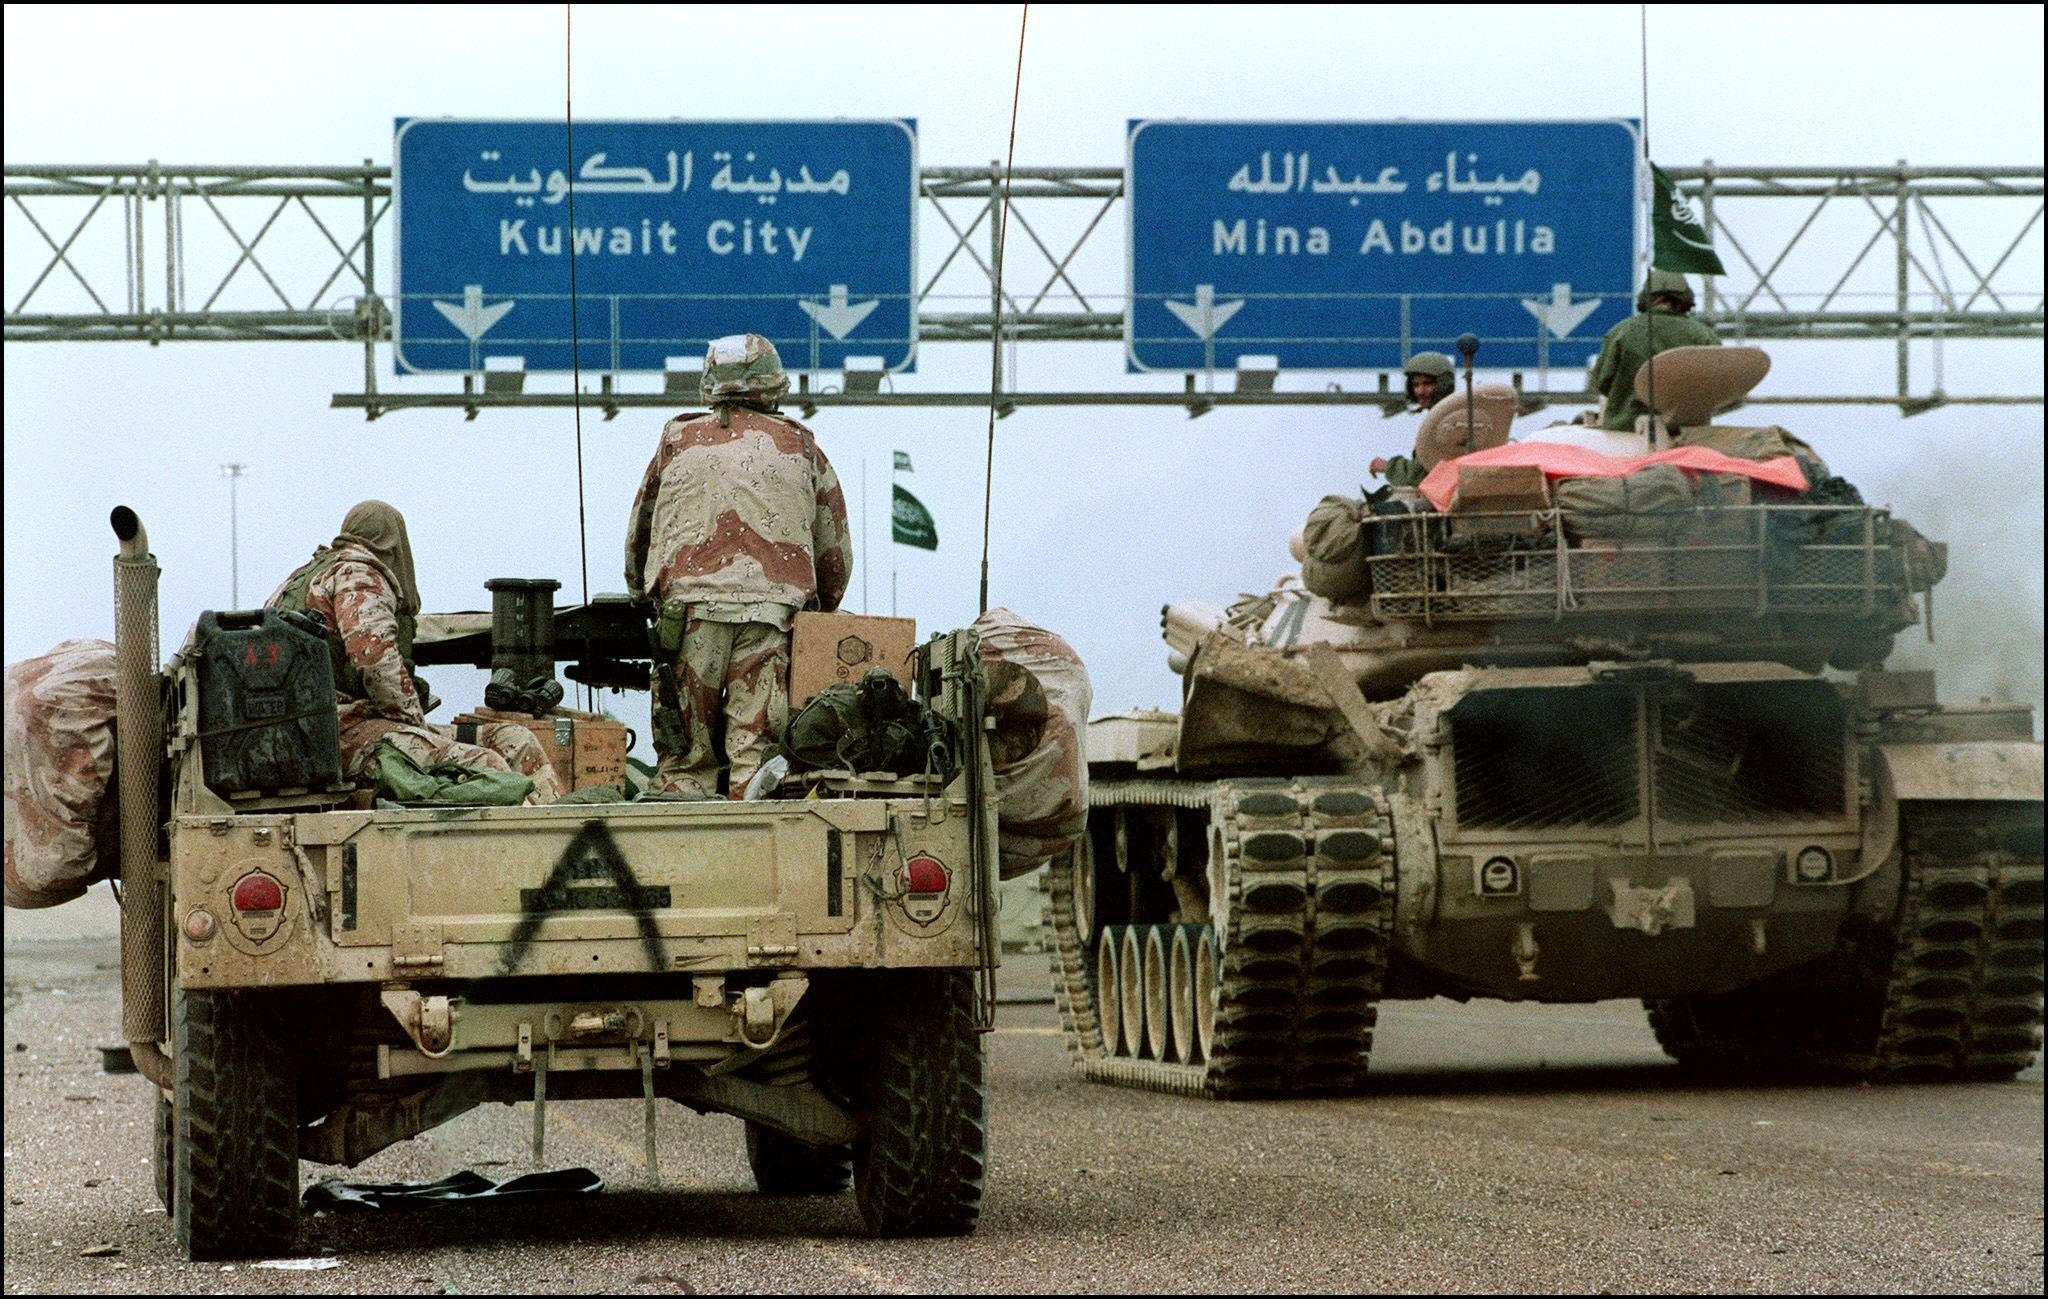 <p>A US Humvee and a Saudi tank pass under a sign directing them to Kuwait City in February 1991 during the Desert Storm offensive</p>